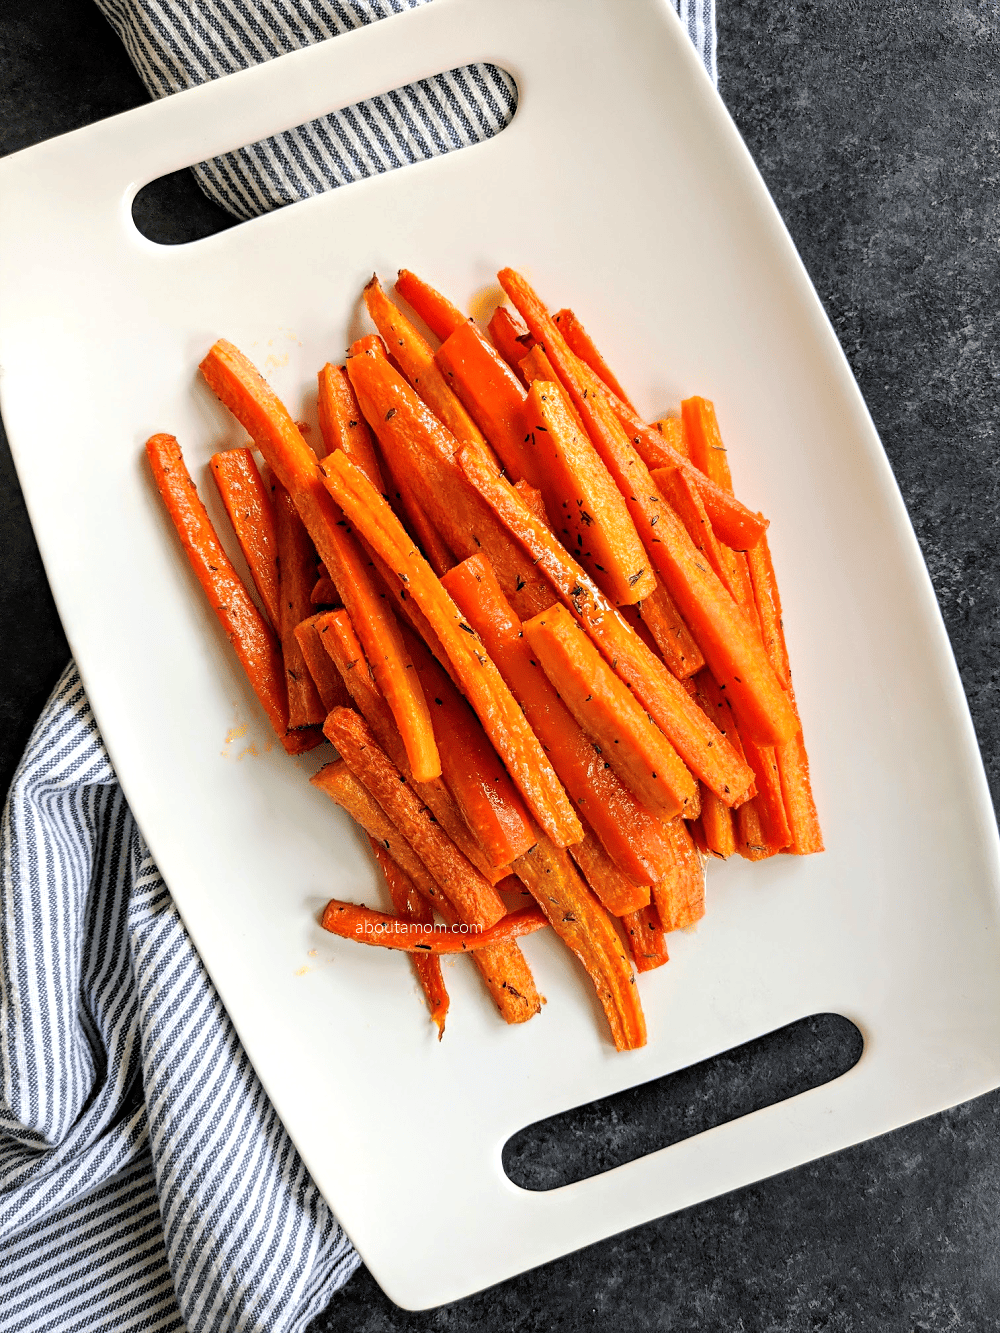 This recipe for roasted honey glazed carrots is an easy way to enjoy carrots. It's one of those easy vegetable side dish recipes that I find myself making time and time again. Carrots tossed in a sweet, sticky glaze and roasted in the oven until fork tender and caramelized. Honey and butter make everything good. Even your picky eaters will love this vegetable side dish.